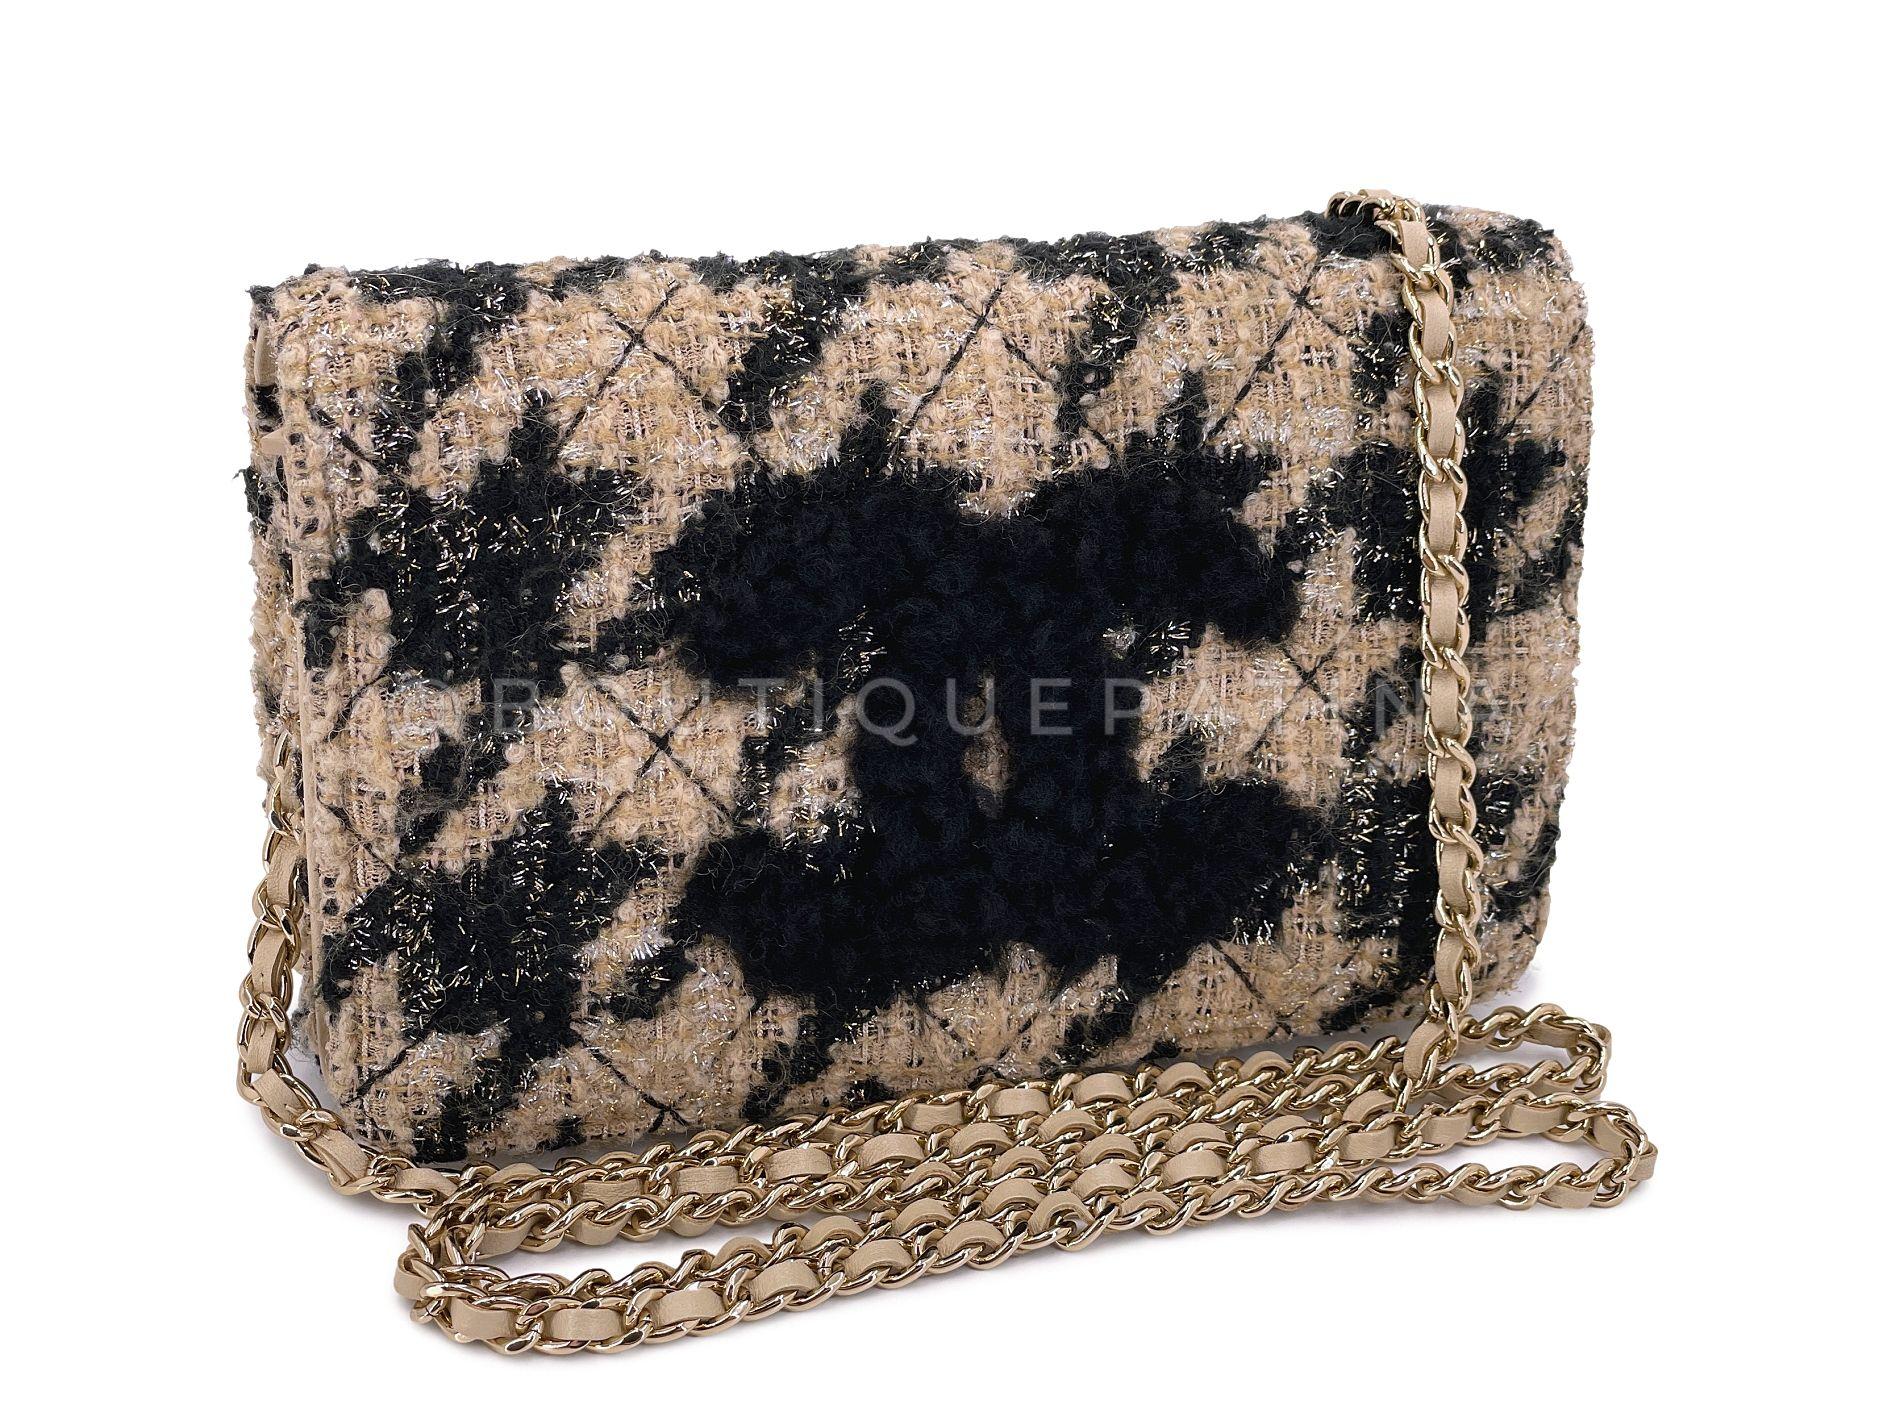 Chanel 19A Houndstooth Tweed Beige Black WOC Wallet on Chain Set Bag 68024 In Excellent Condition For Sale In Costa Mesa, CA